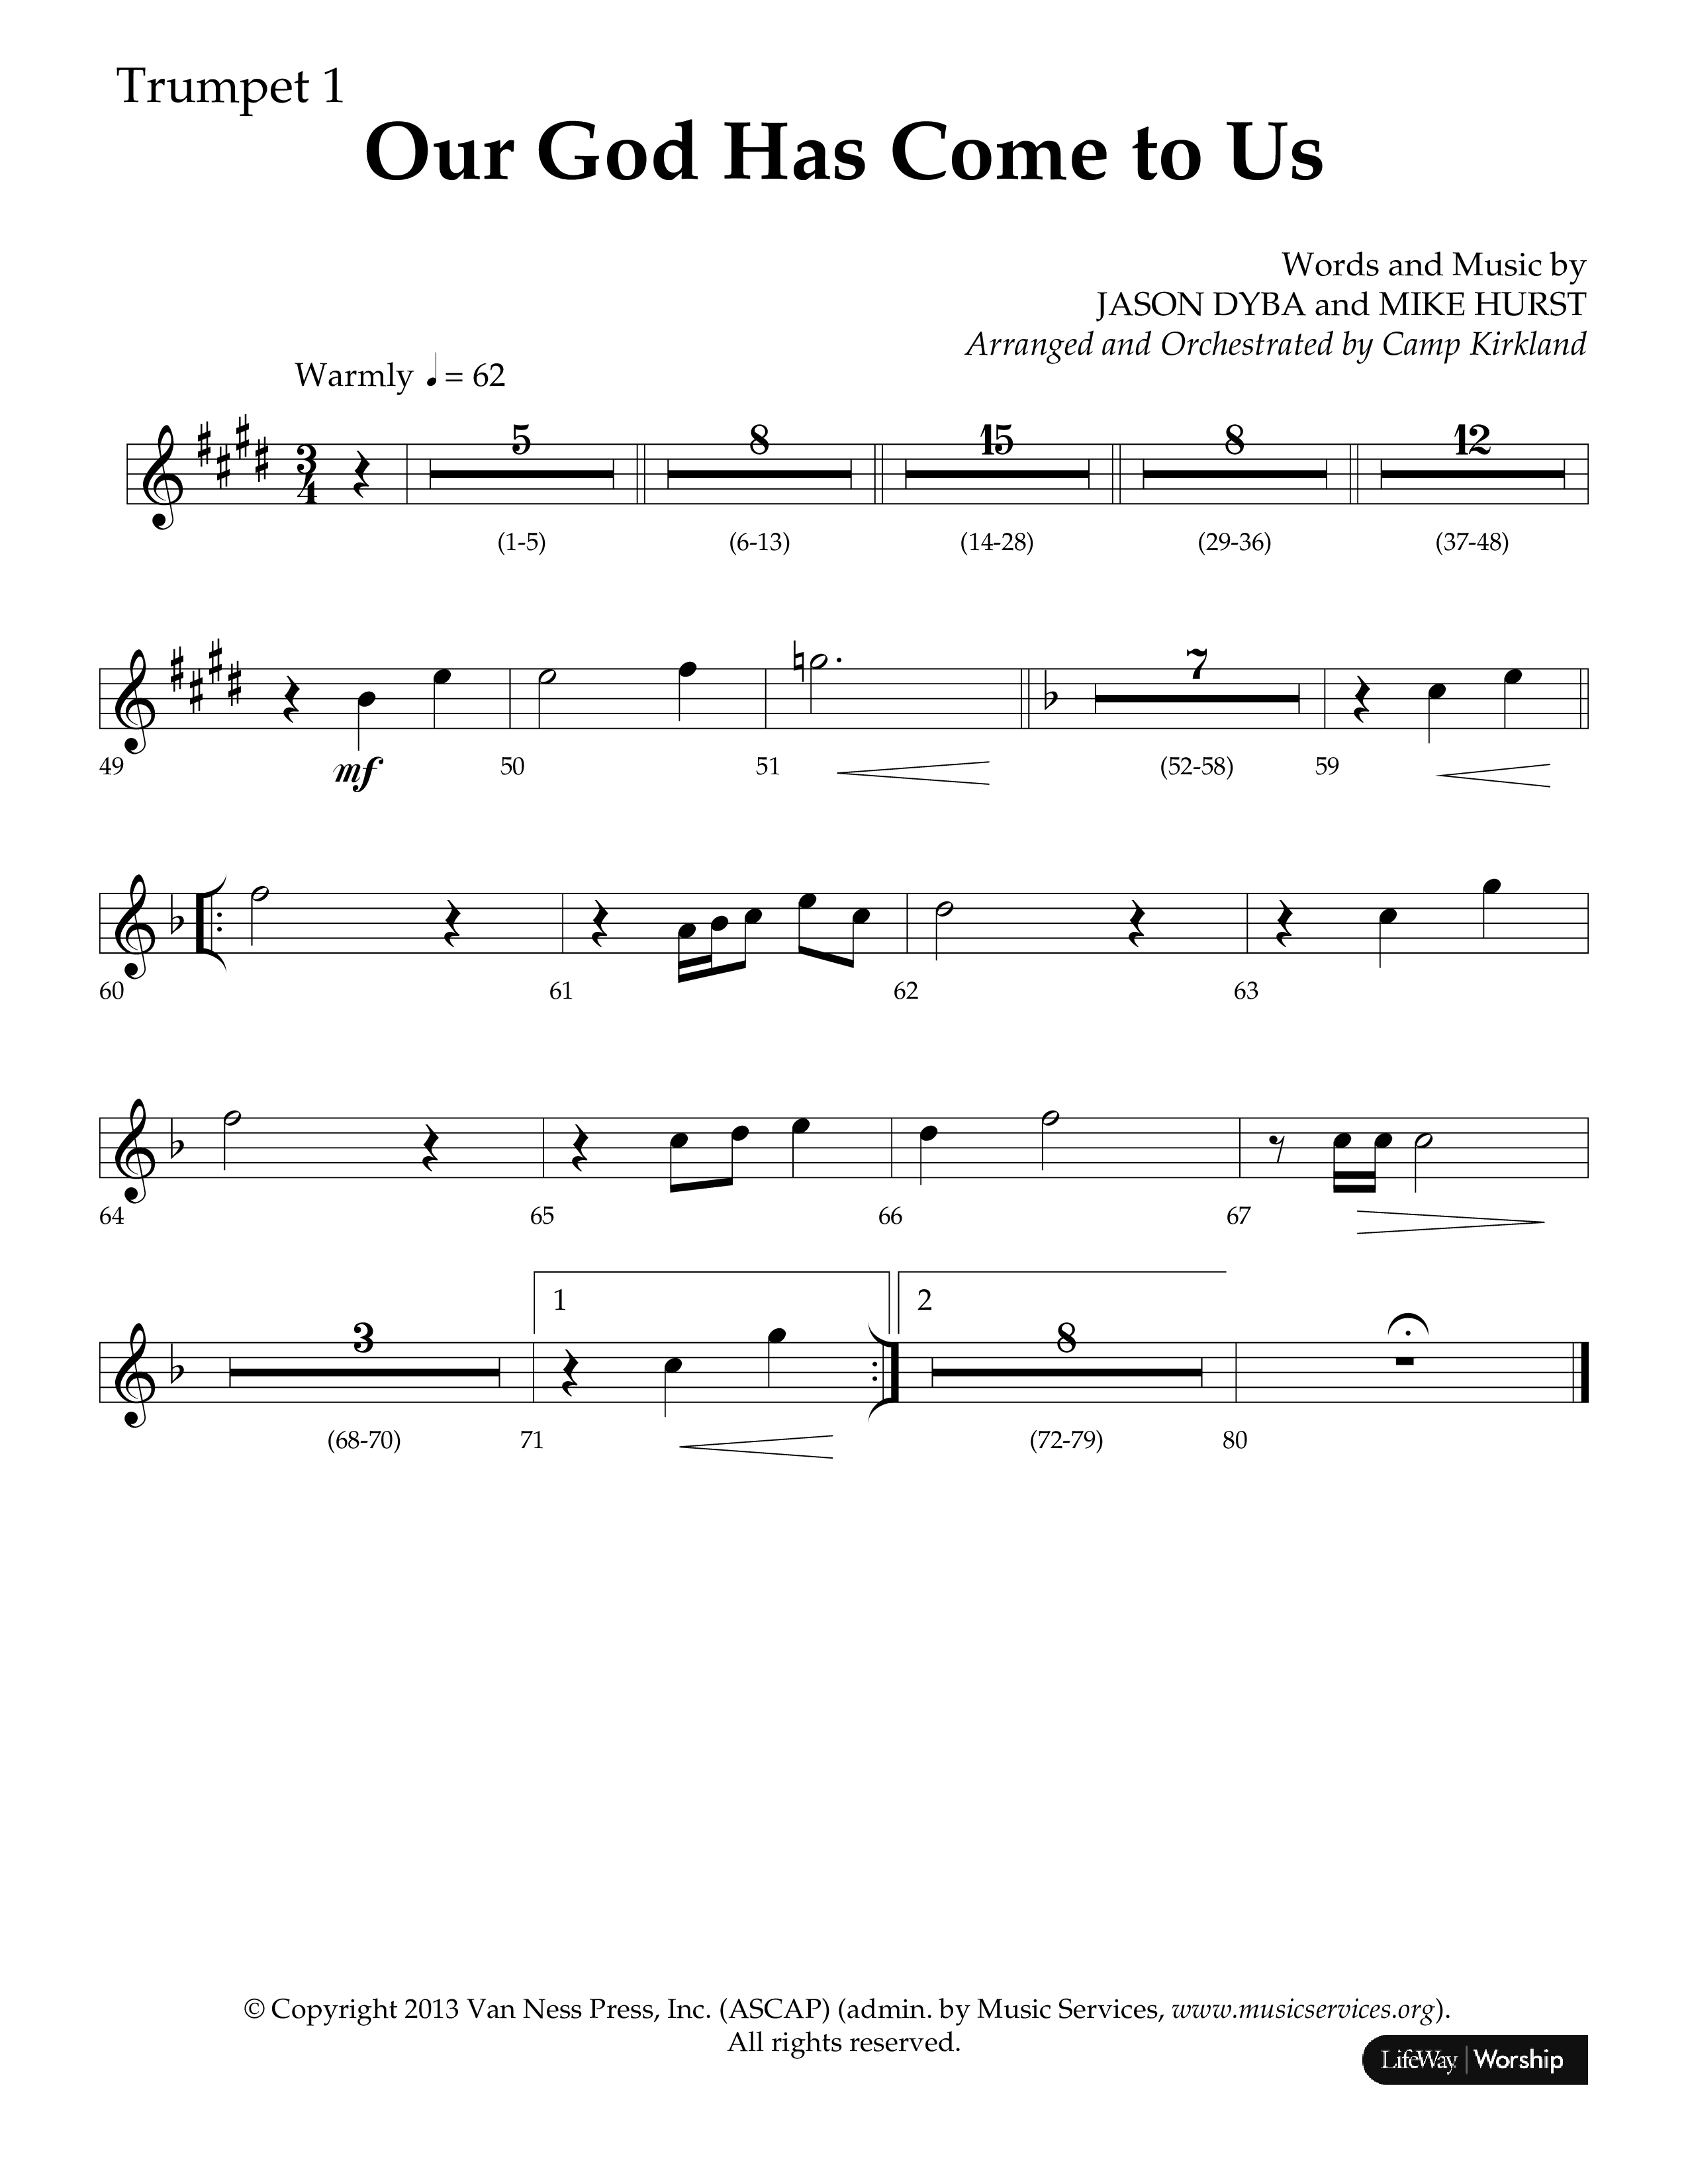 Our God Has Come To Us (Choral Anthem SATB) Trumpet 1 (Lifeway Choral / Arr. Camp Kirkland)